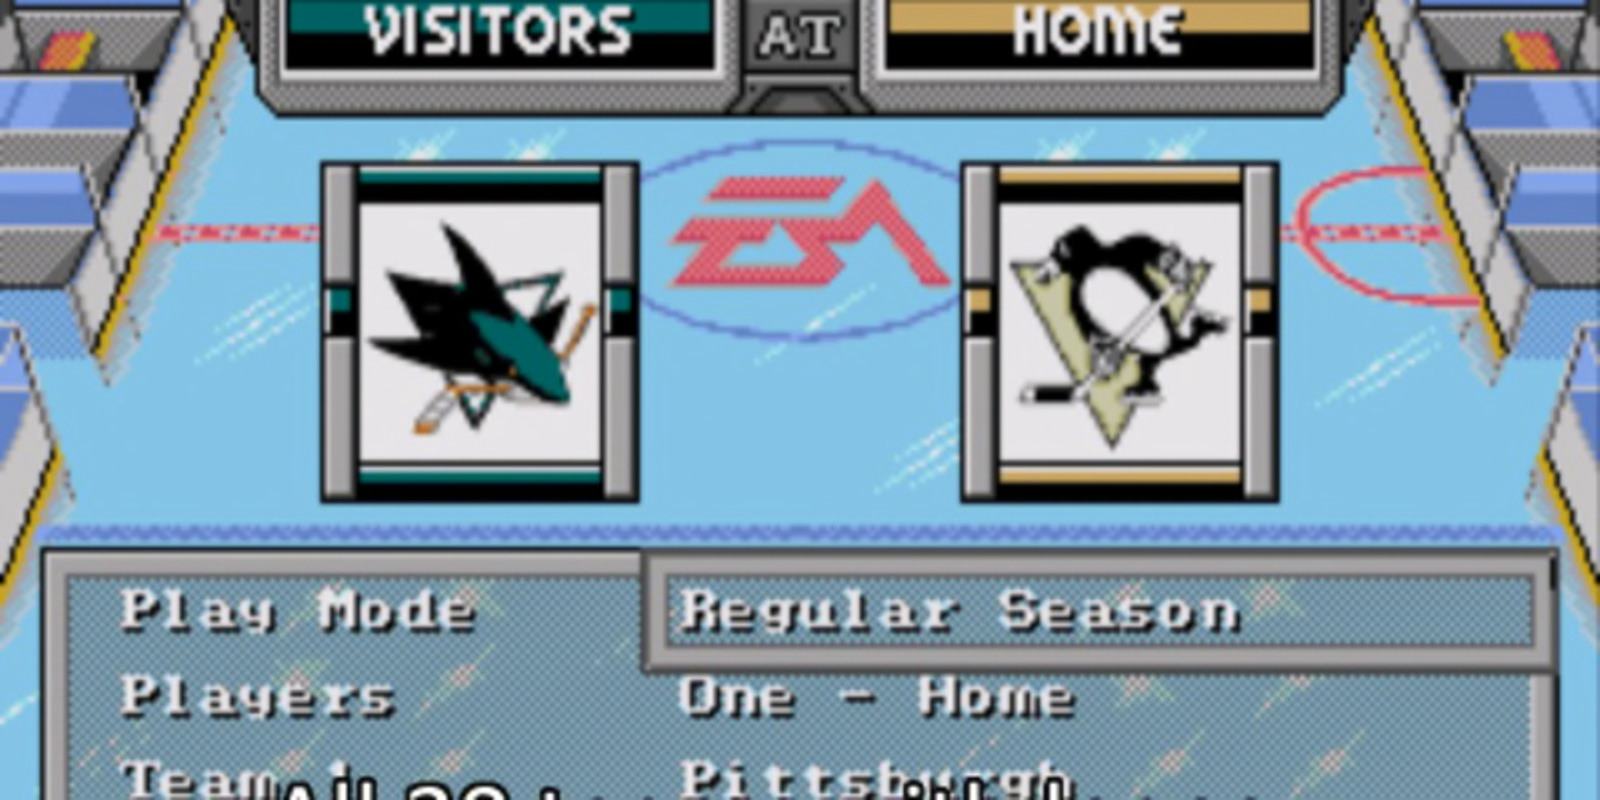 NHL94 Update for the Old School Gamers